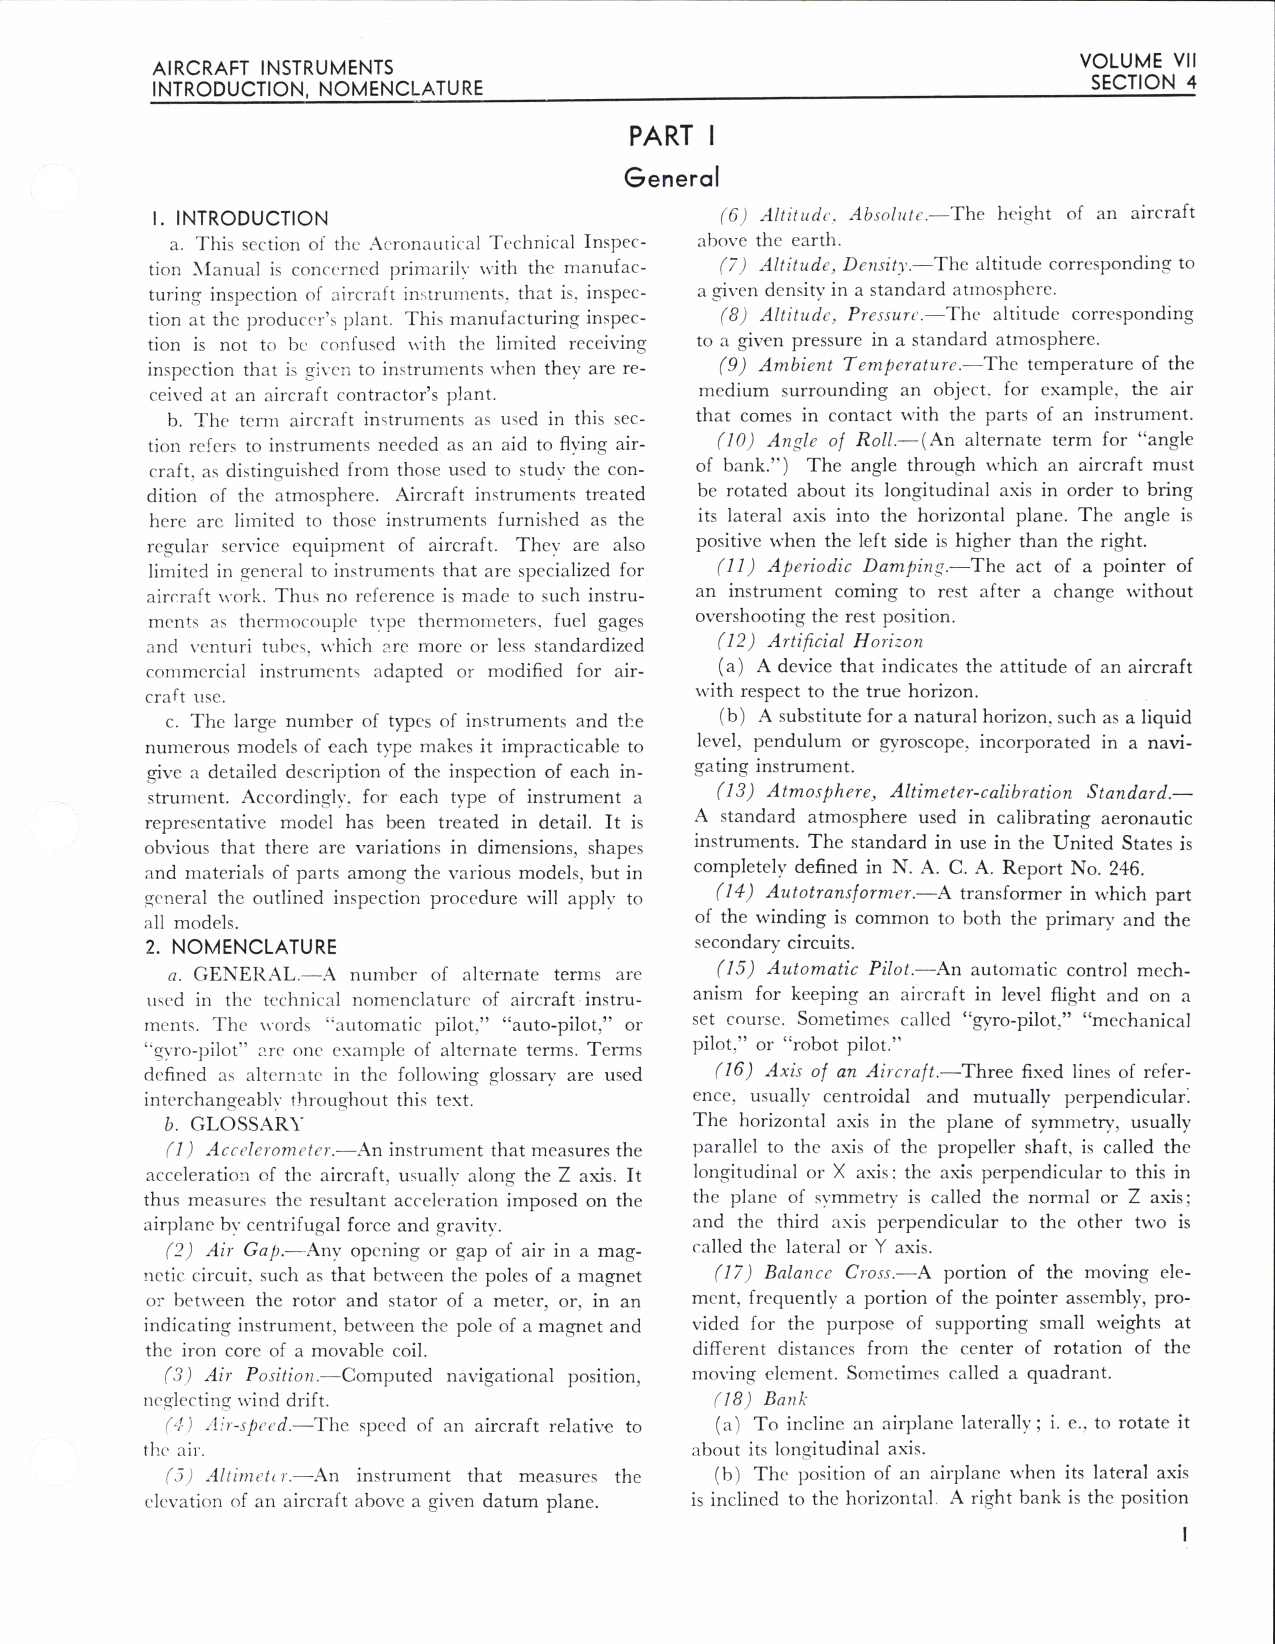 Sample page 7 from AirCorps Library document: Aeronautical Technical Inspection Manual - Aircraft Instruments